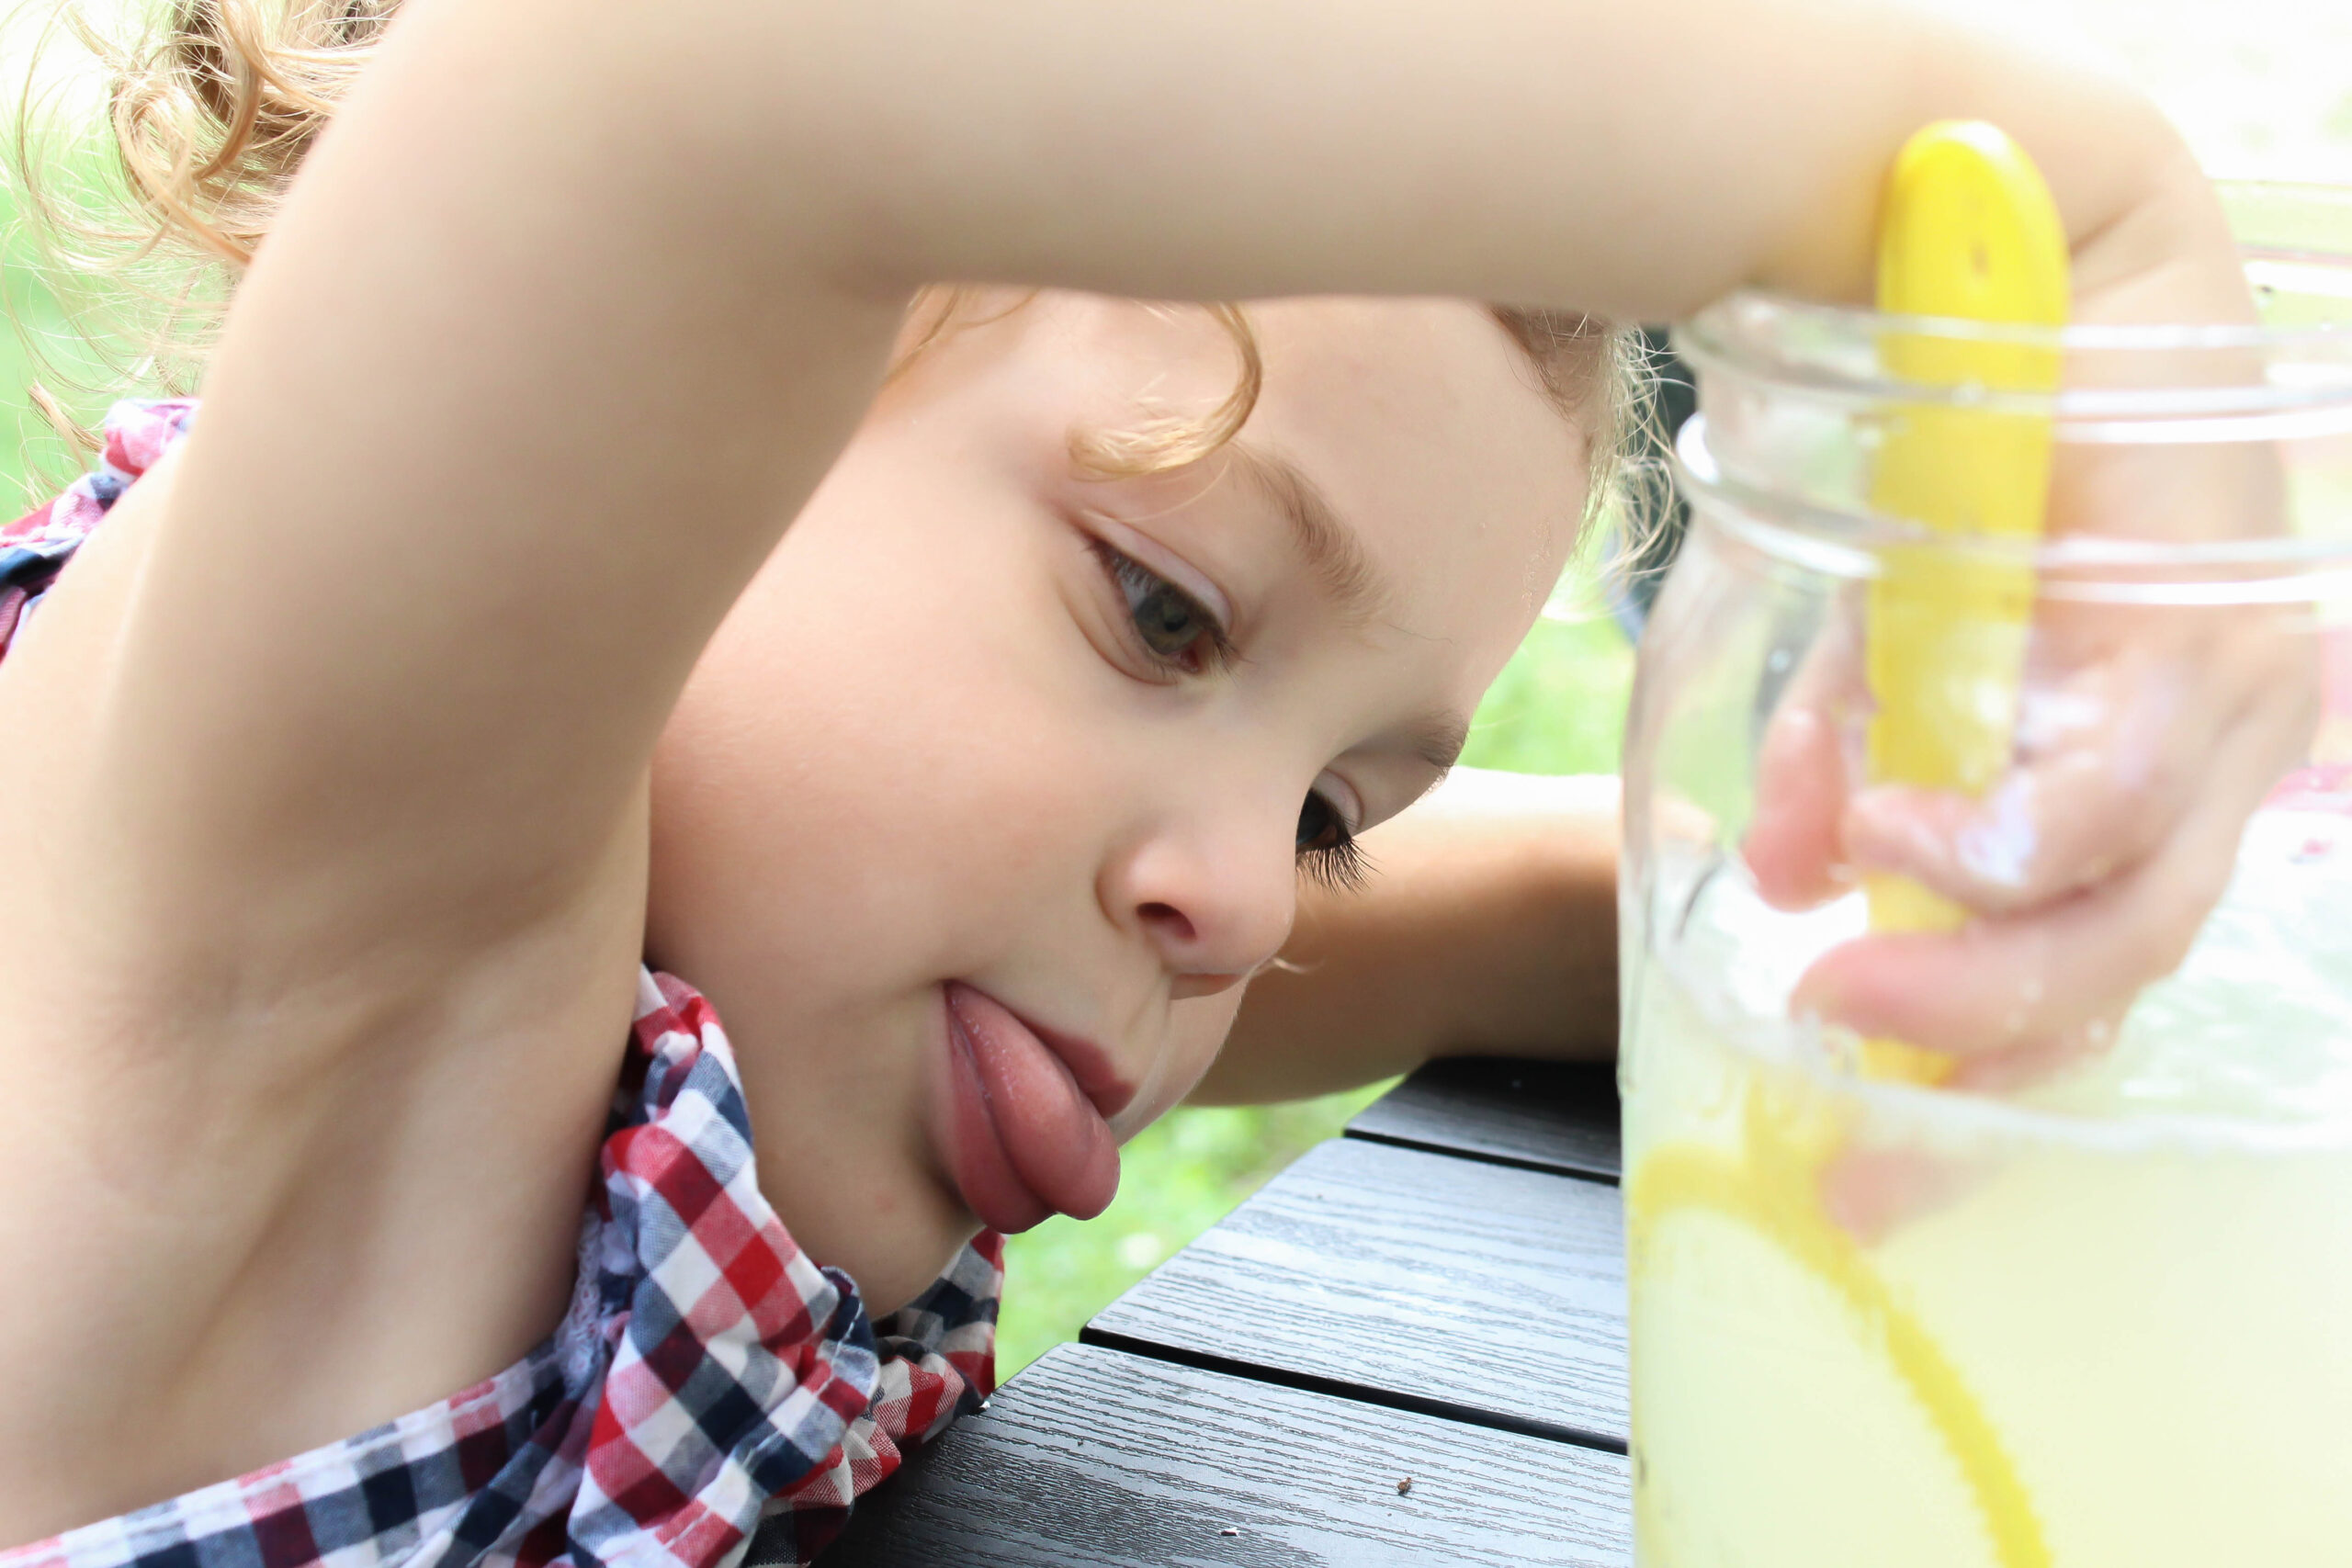 If your kids are anything like mine, they love bubbles. My Non-Toxic Homemade Bubble Solution means you always have a batch on hand.

#bubbles #diy #homemadebubblesolution #screenfreeactivities